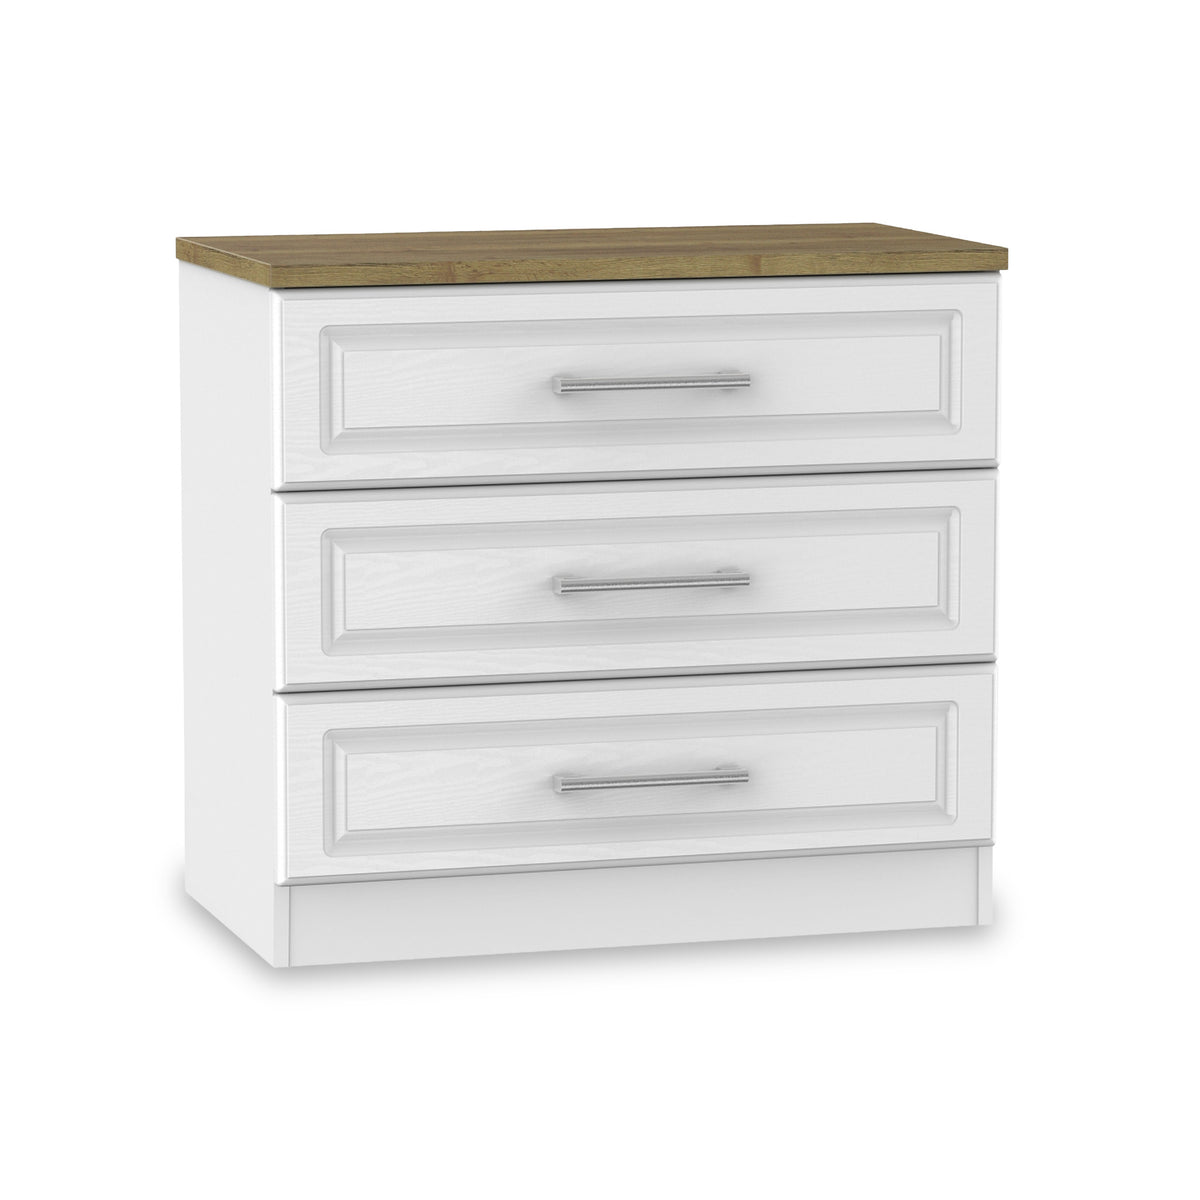 Talland White 3 Drawer Chest by Roseland Furniture